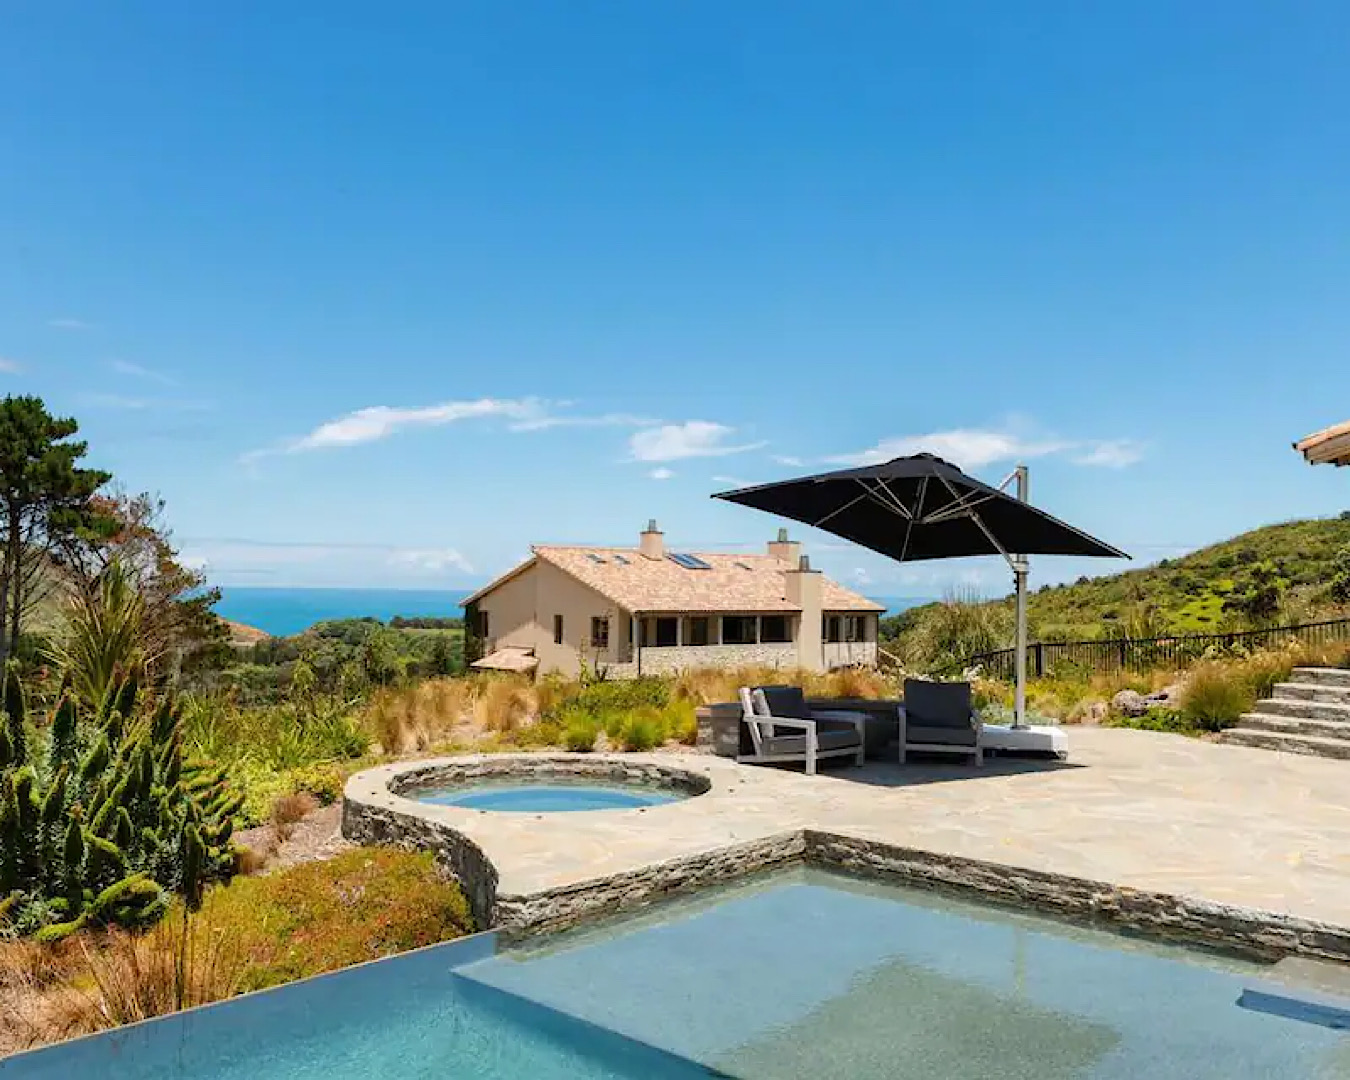 European-reminiscent stone pool and spa pool overlooking an estate in Muriwai.